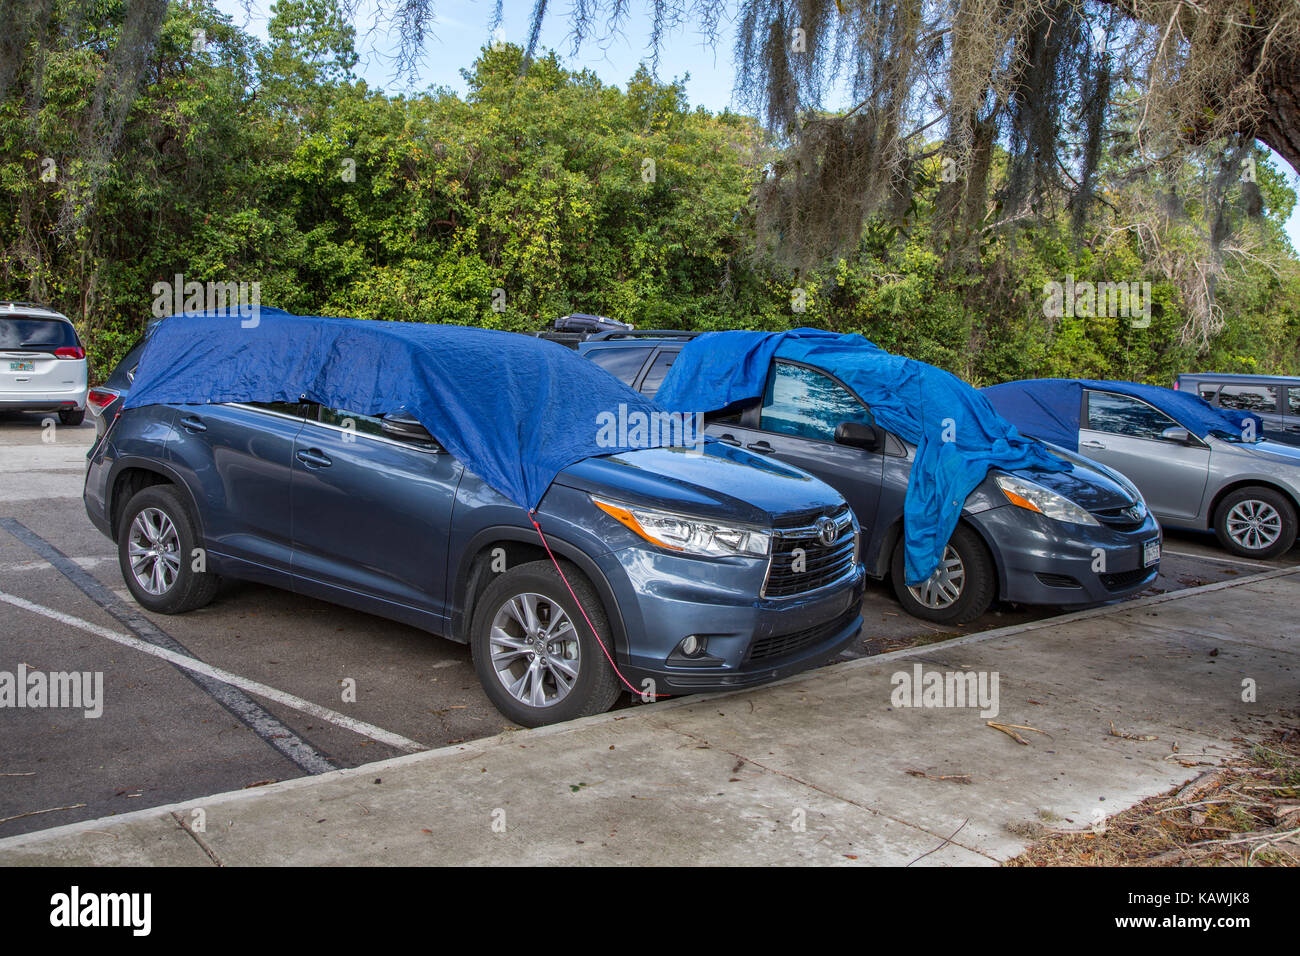 Everglades National Park, Florida.  Tarps Cover Cars to Protect from Vultures which Chew Plastic Around Windows. Stock Photo